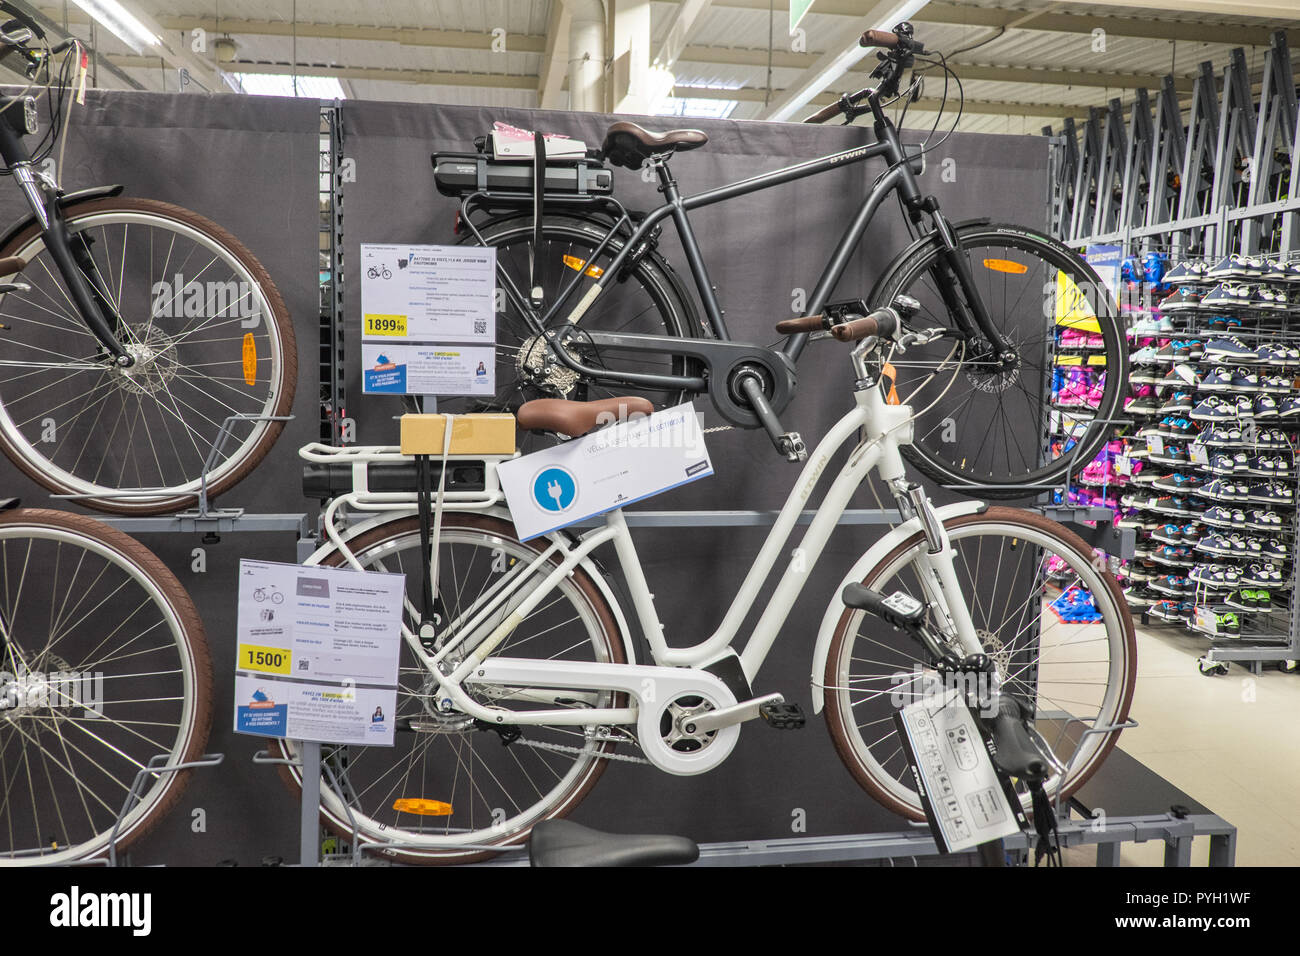 Electric,bicycles,in,branch,of,Decathlon,sport,sports,superstore,outlet,shop,Carcassonne,Aude,department,South,of,France,French,Europe,European, Stock Photo